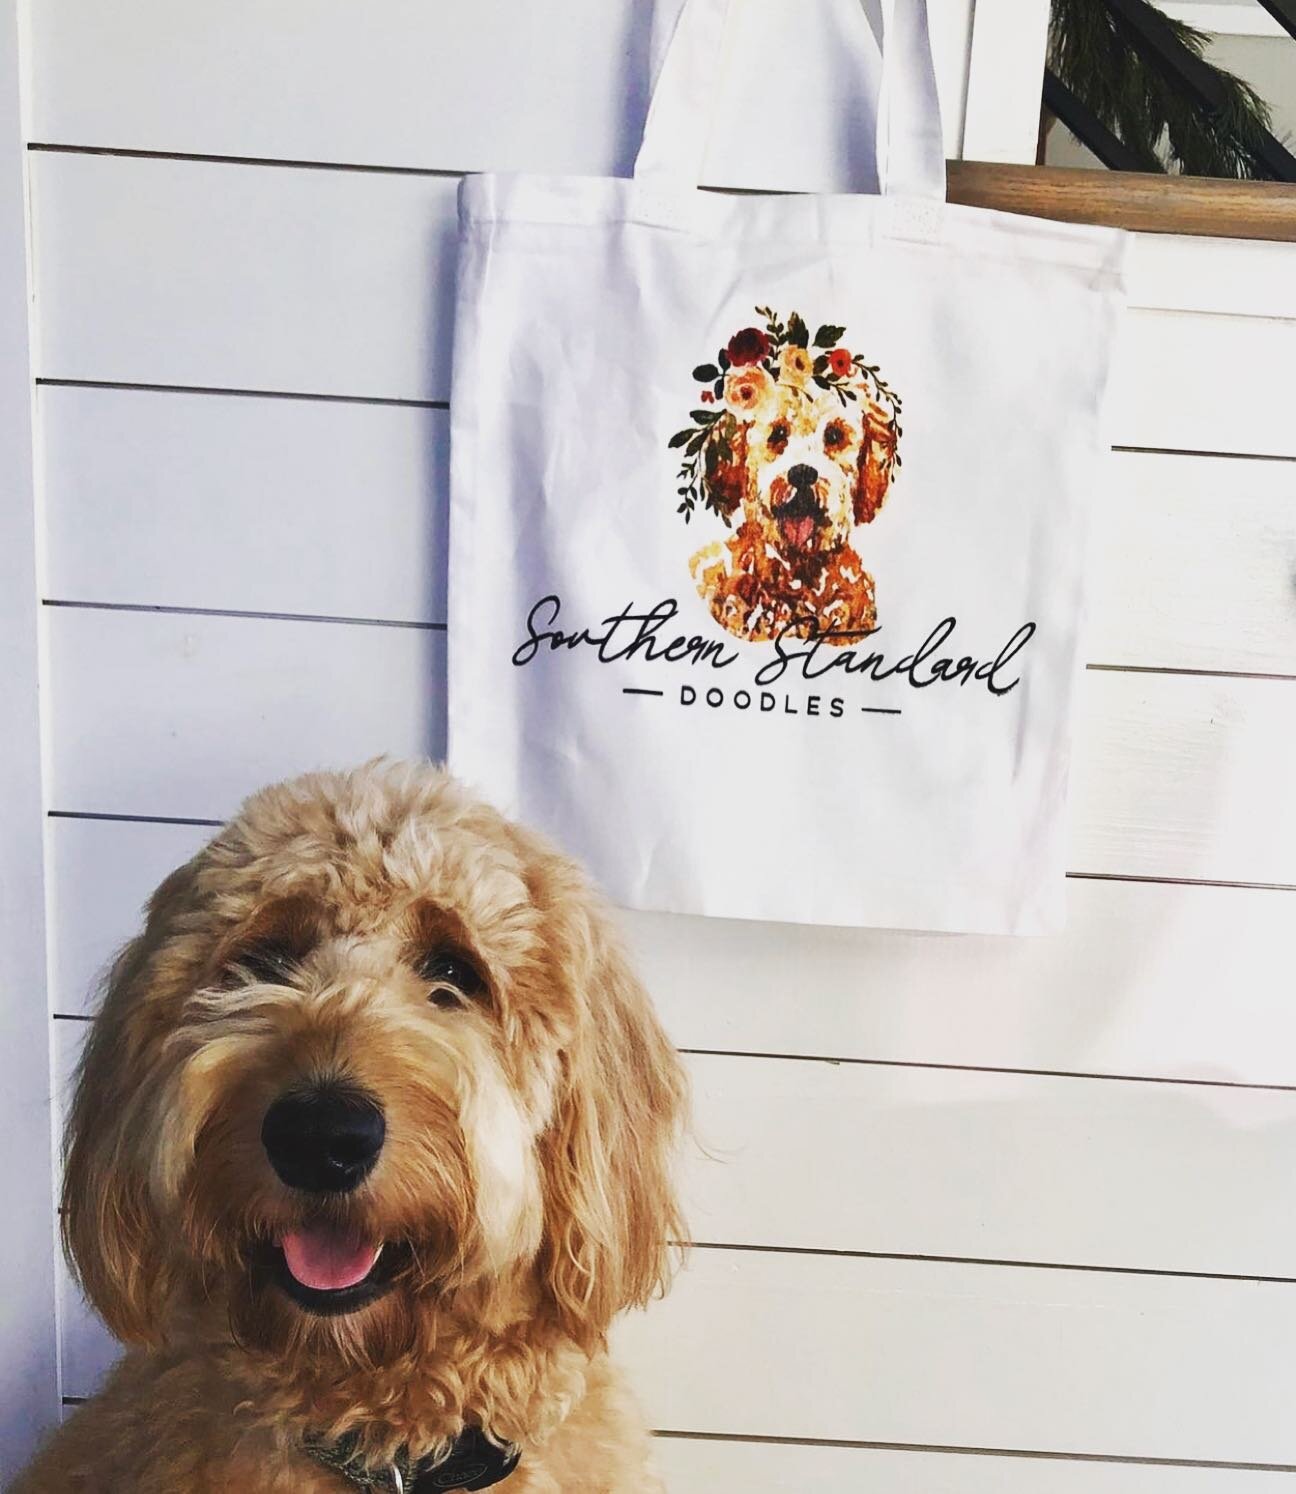 I&rsquo;d rather do jobs for dogs than humans any day! We do tote bags too if folks need any 👍